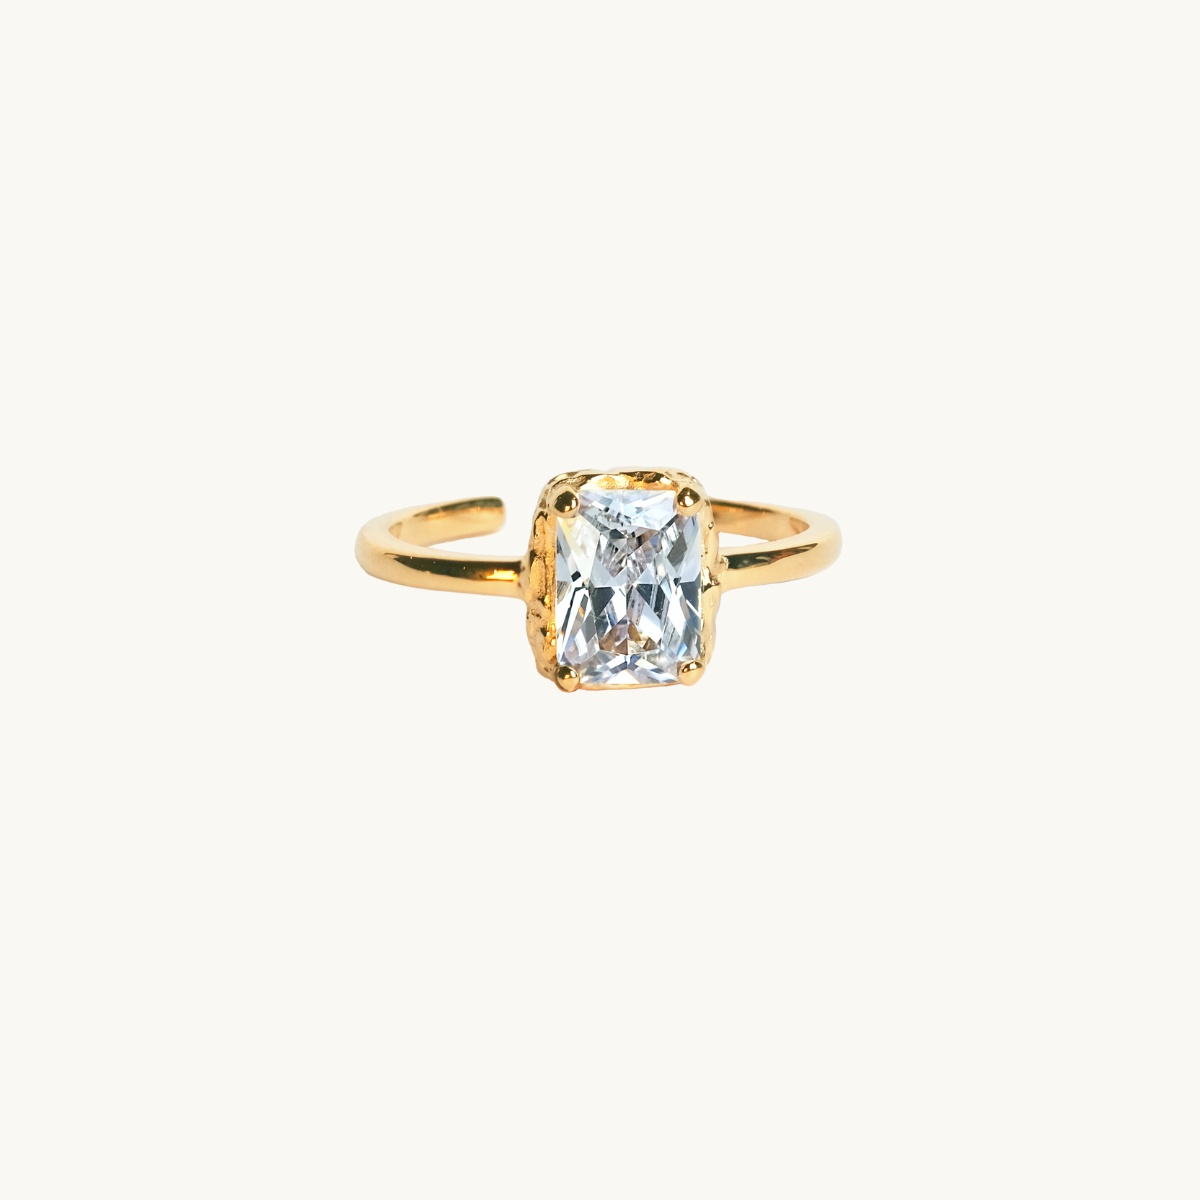 A ring in gold with a white cz stone